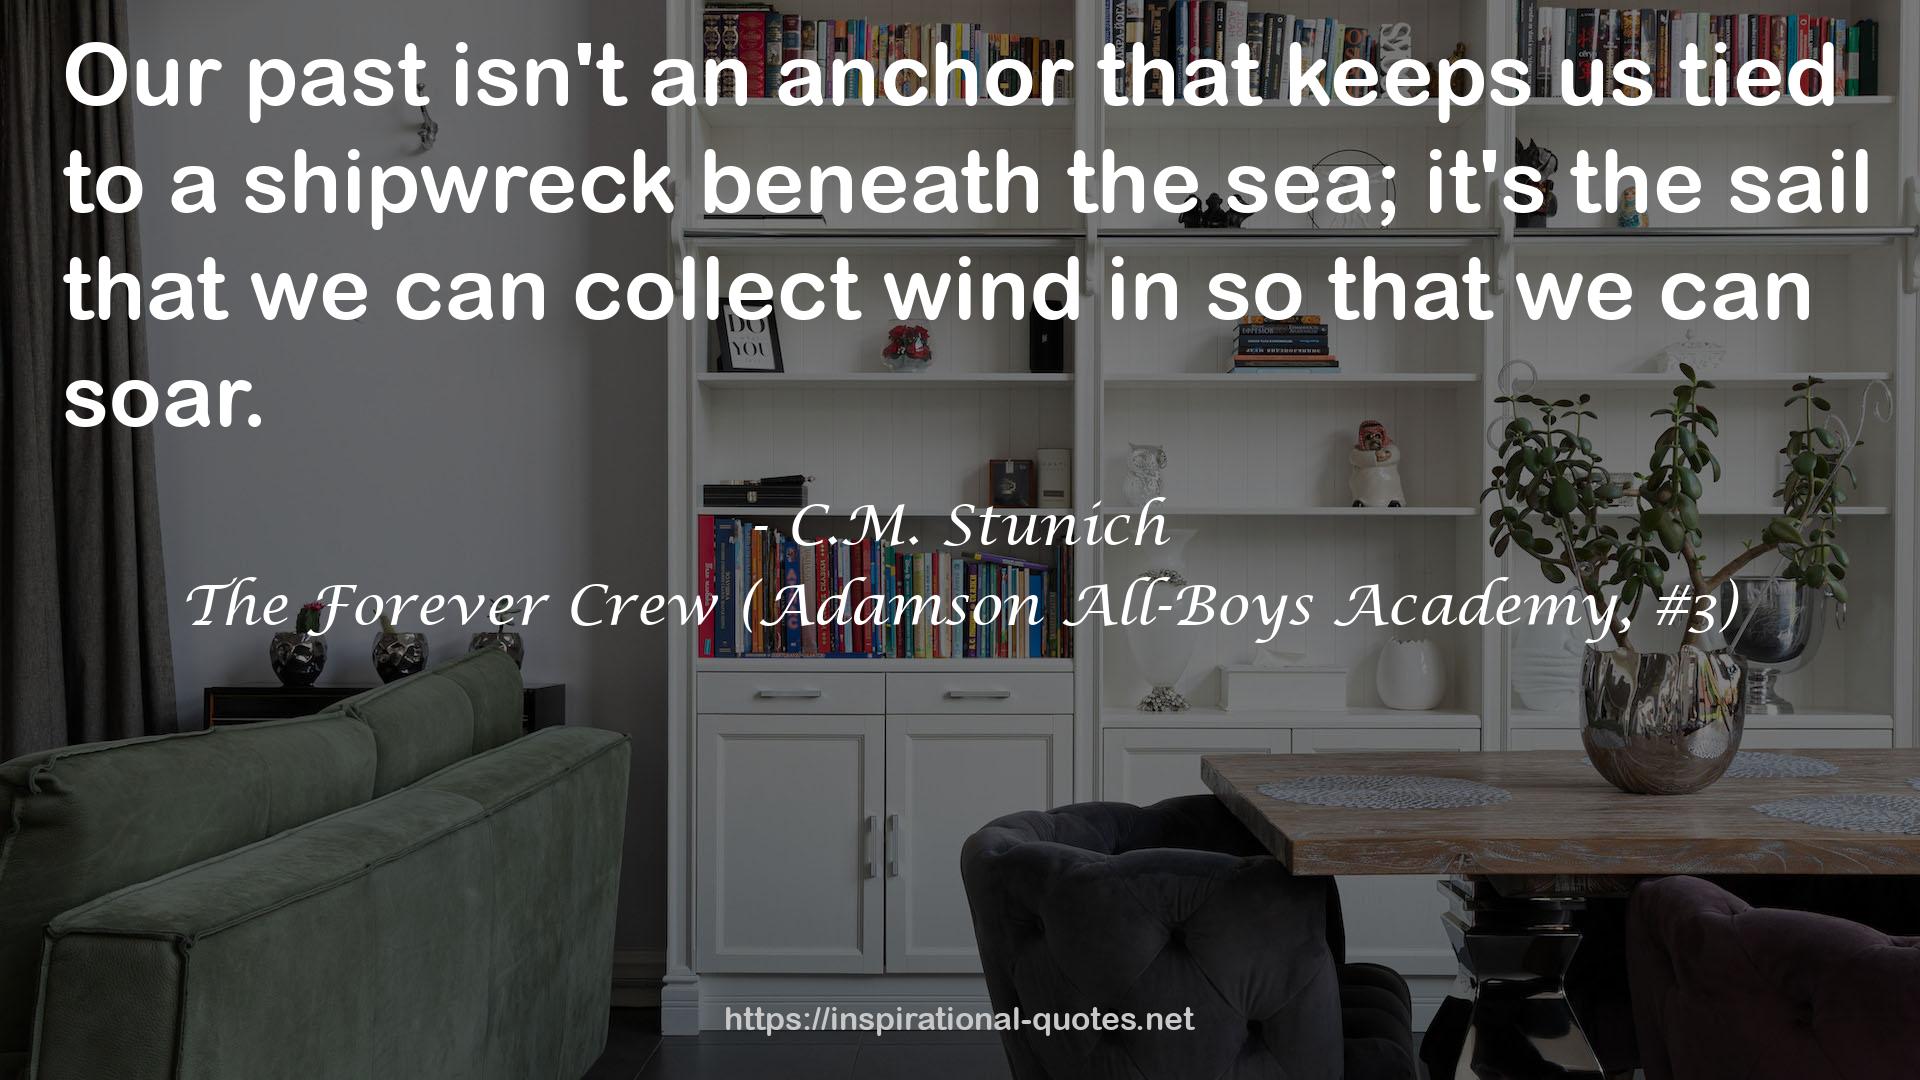 The Forever Crew (Adamson All-Boys Academy, #3) QUOTES